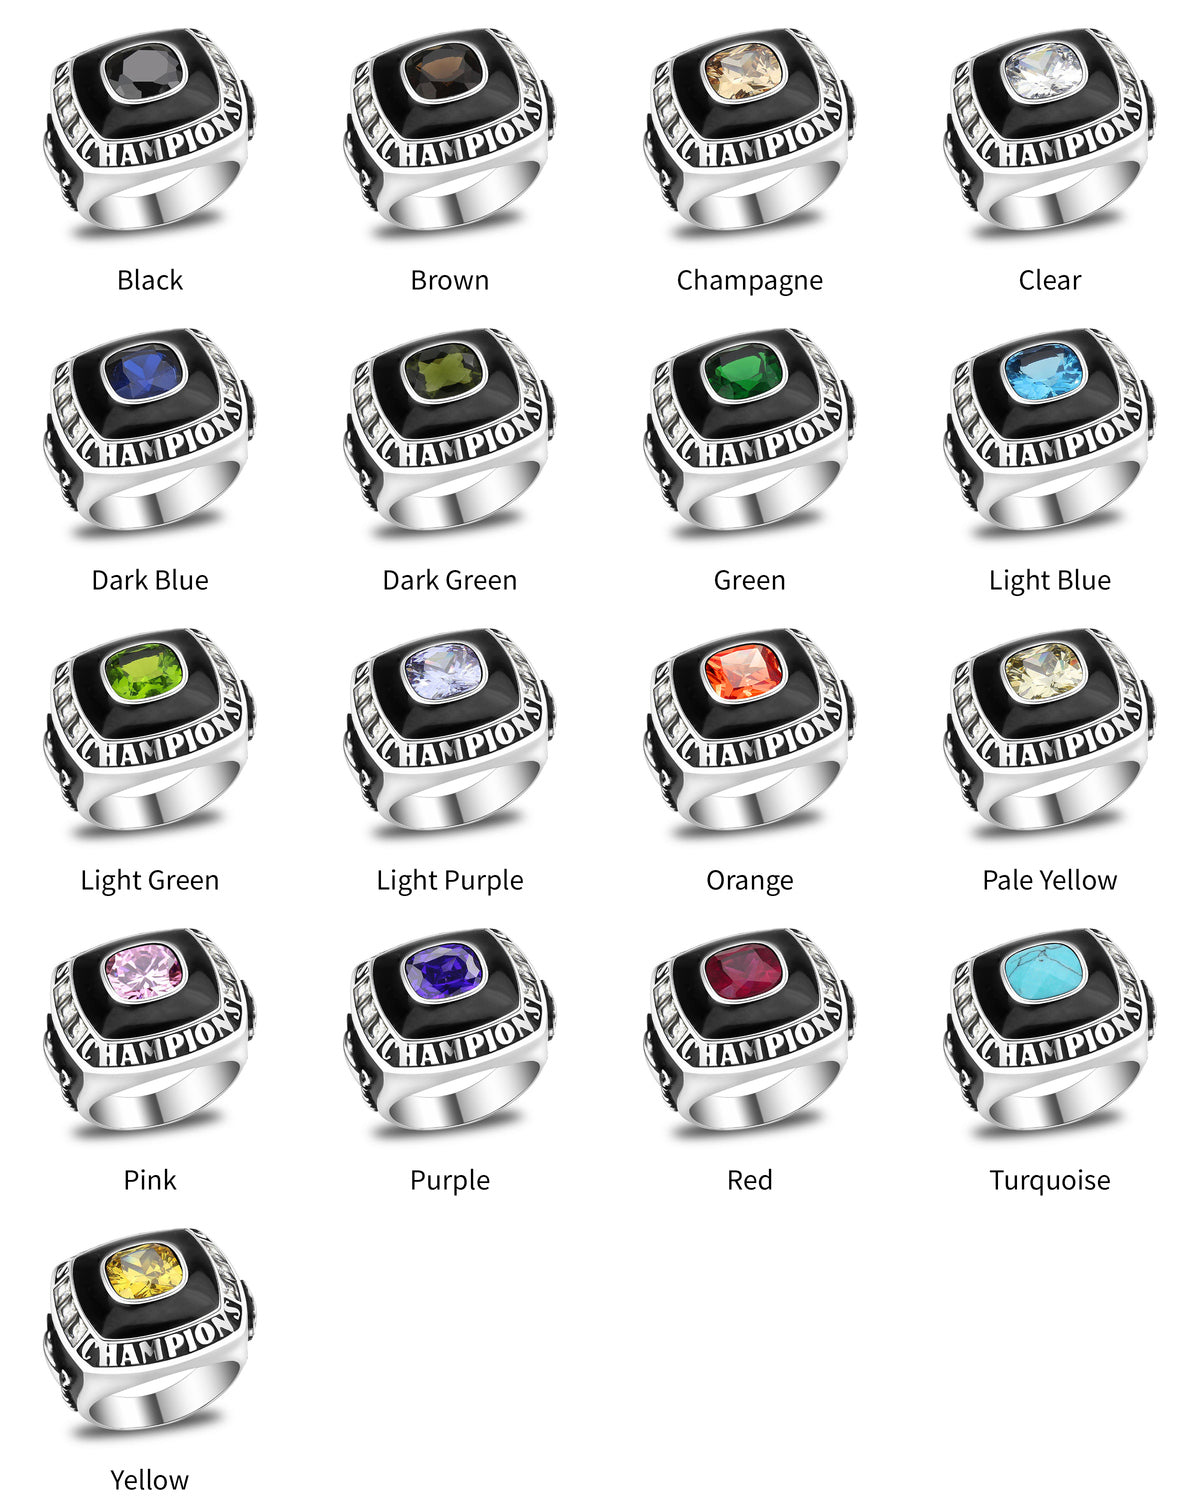 Personalized Football Championship Ring